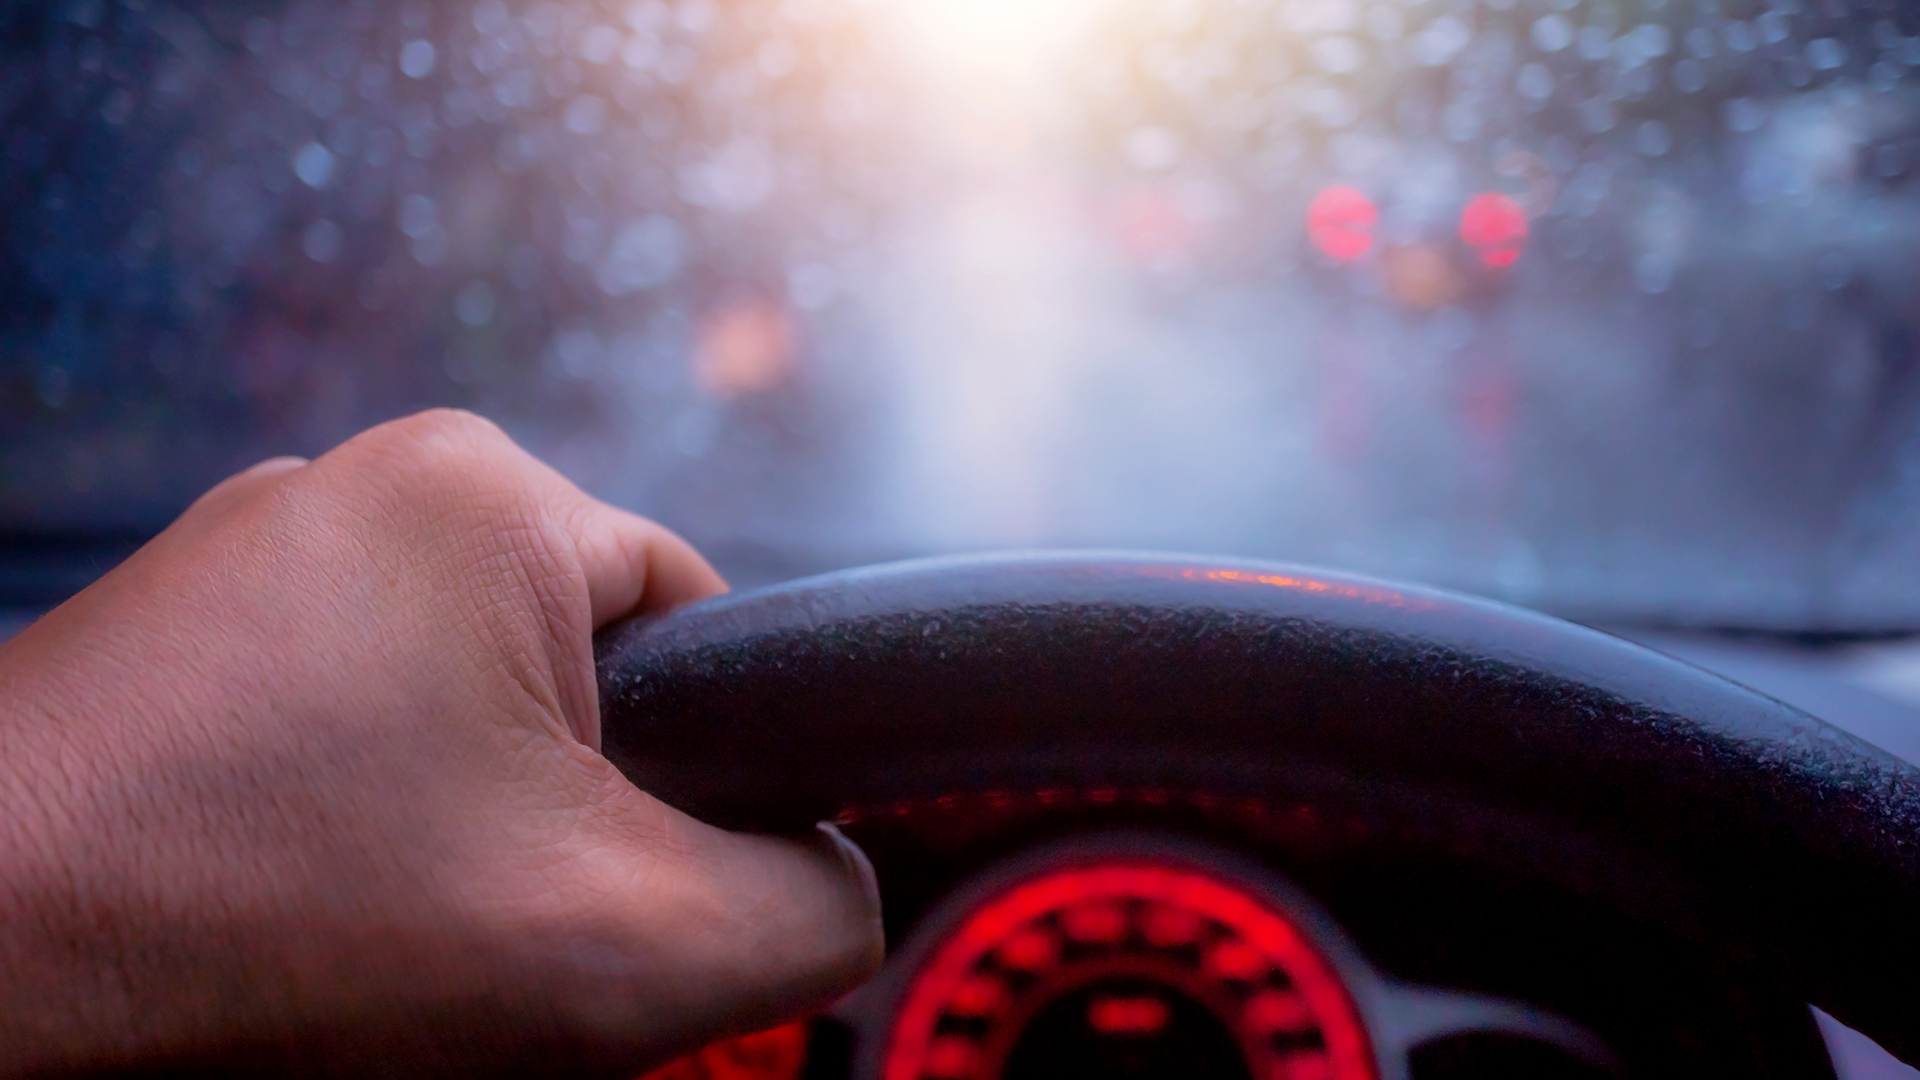 Keeping Safe While Driving In South Florida Rain 1 DUI Accidents South Florida Injury Law Firm